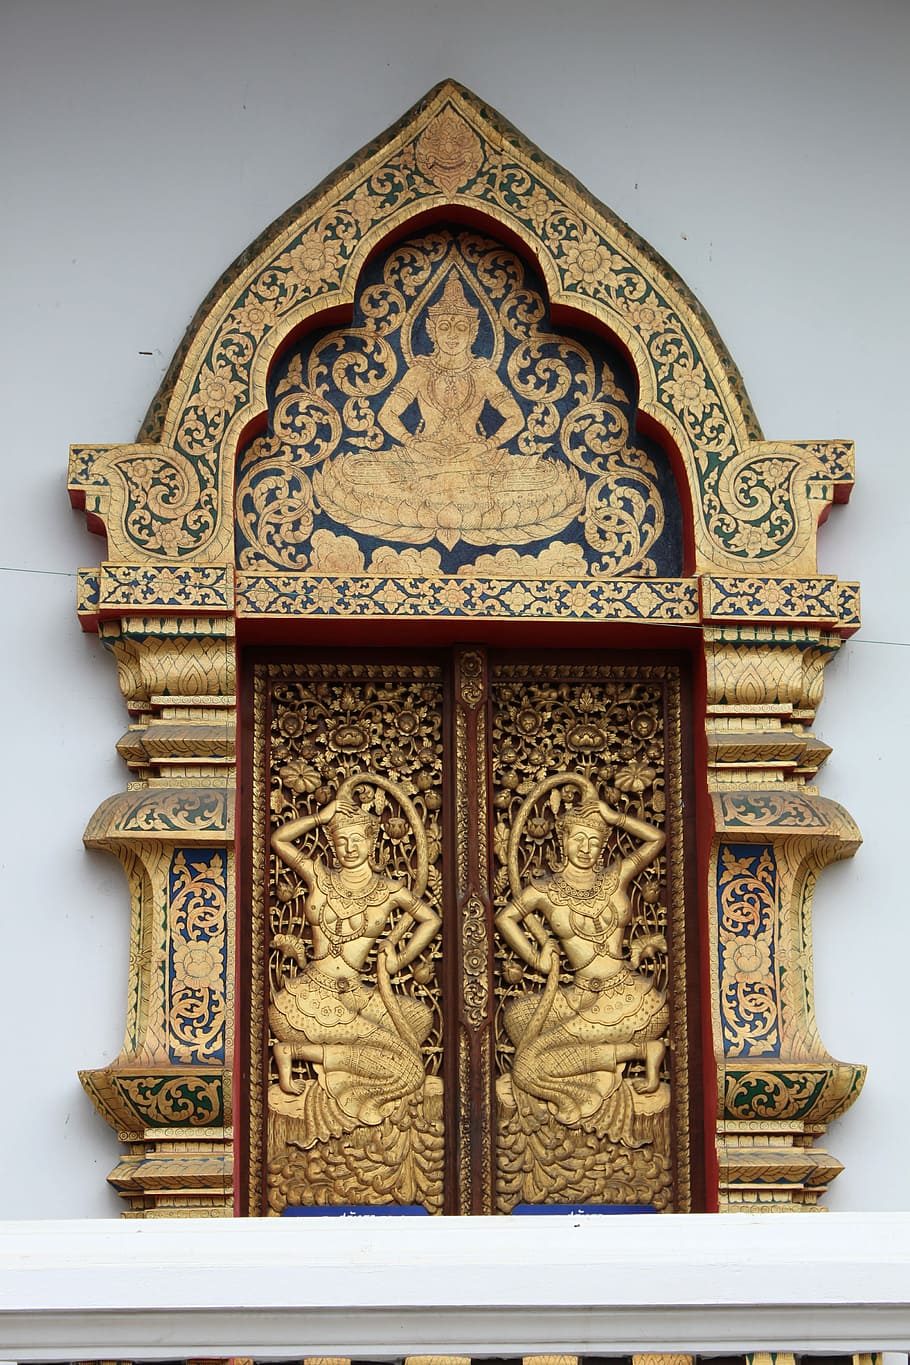 Window, Temple, North Thailand, architecture, bas relief, ornate